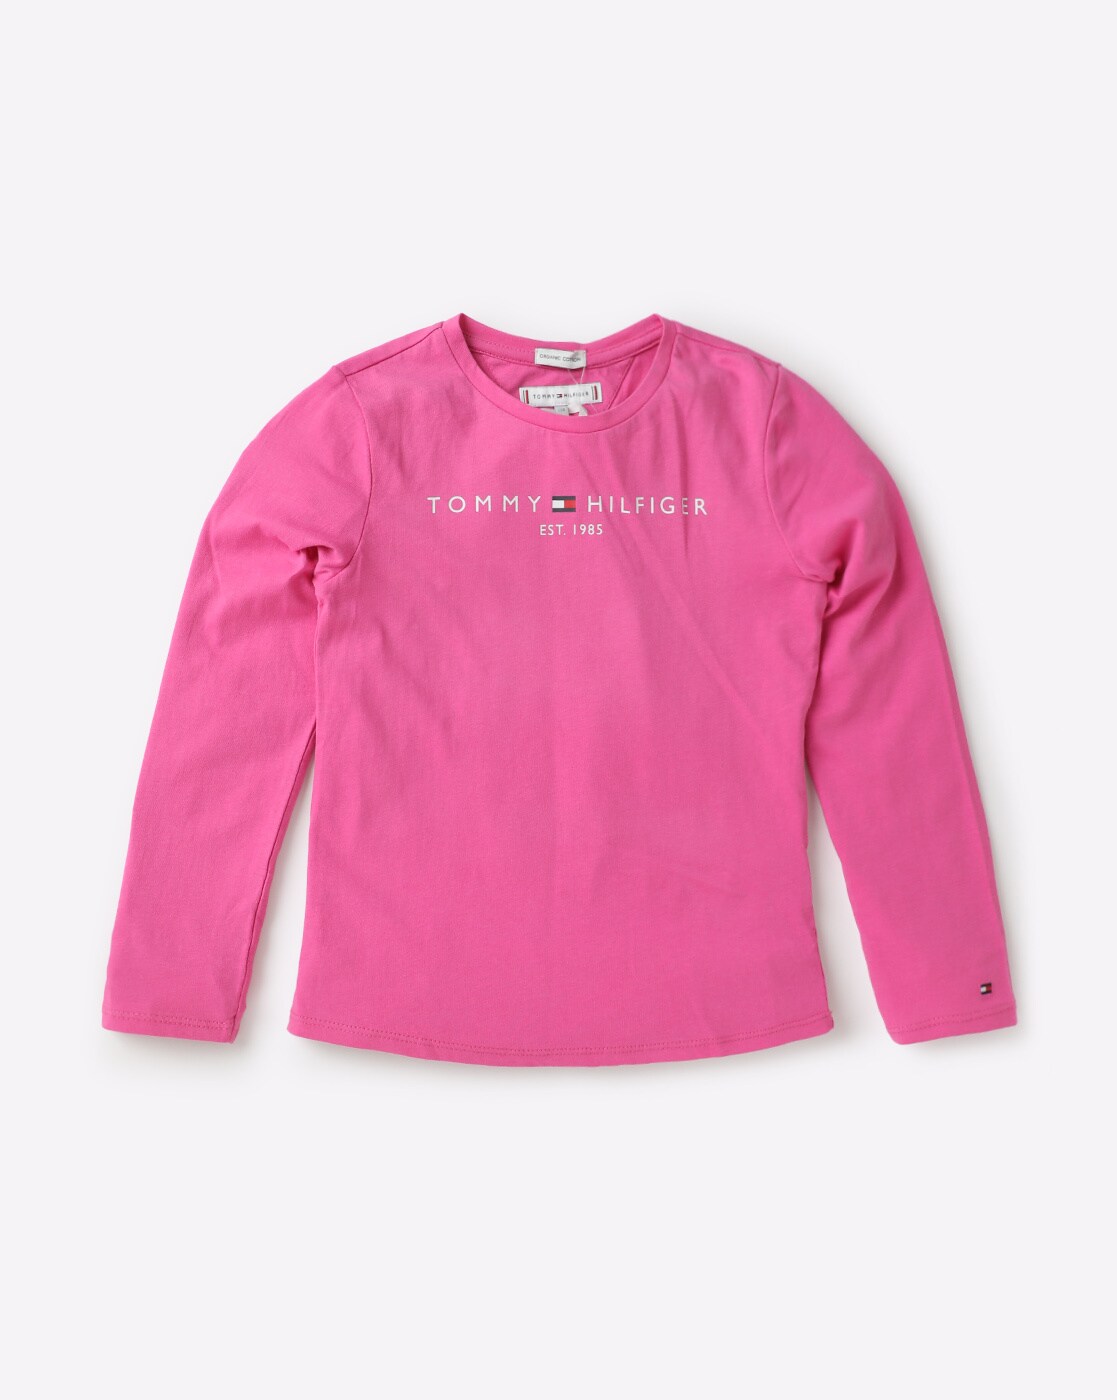 by TOMMY HILFIGER Tshirts Online Girls Pink Buy for